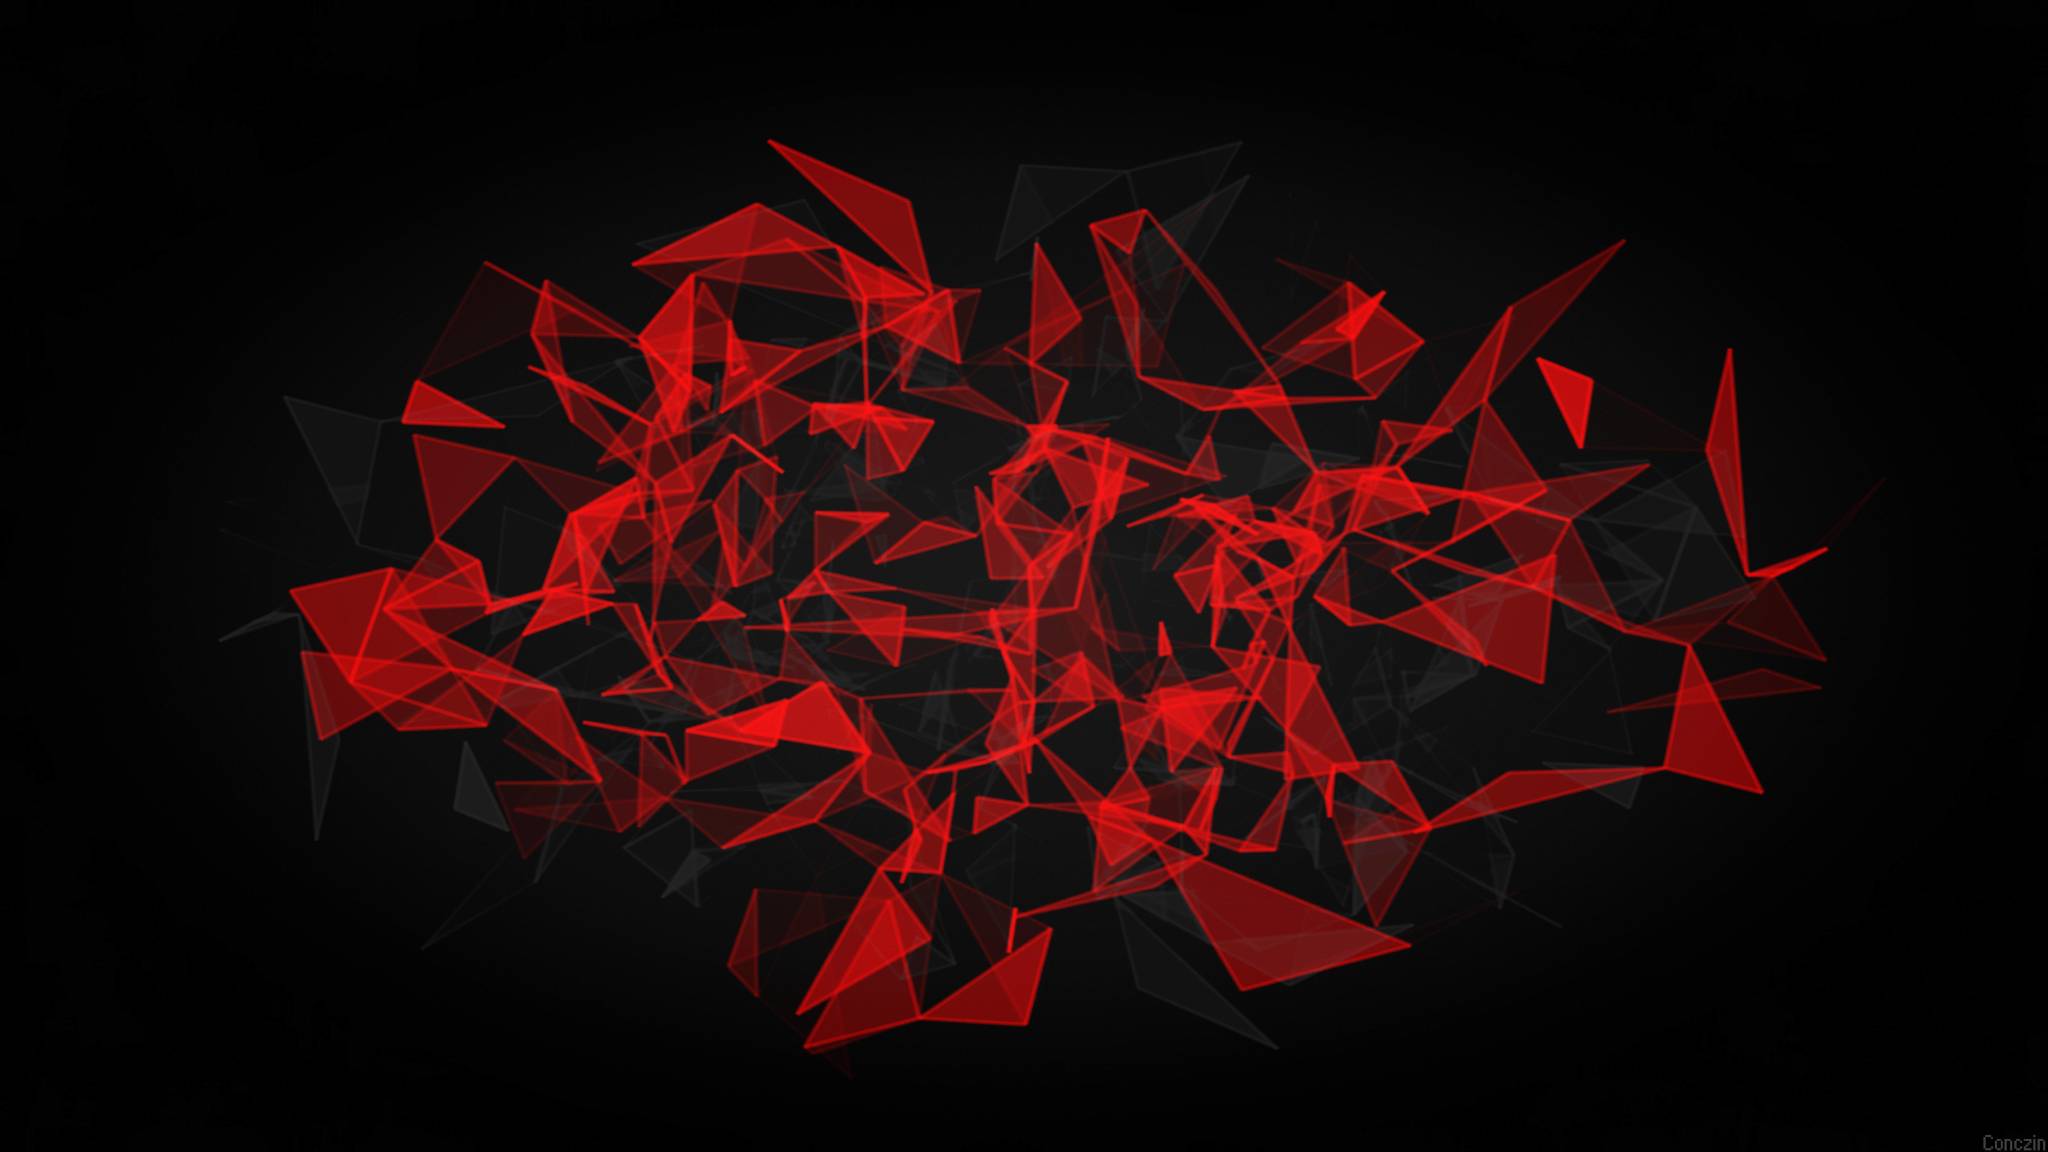 Red And Black 2048x1152 Wallpapers Top Free Red And Black 2048x1152 Backgrounds Wallpaperaccess